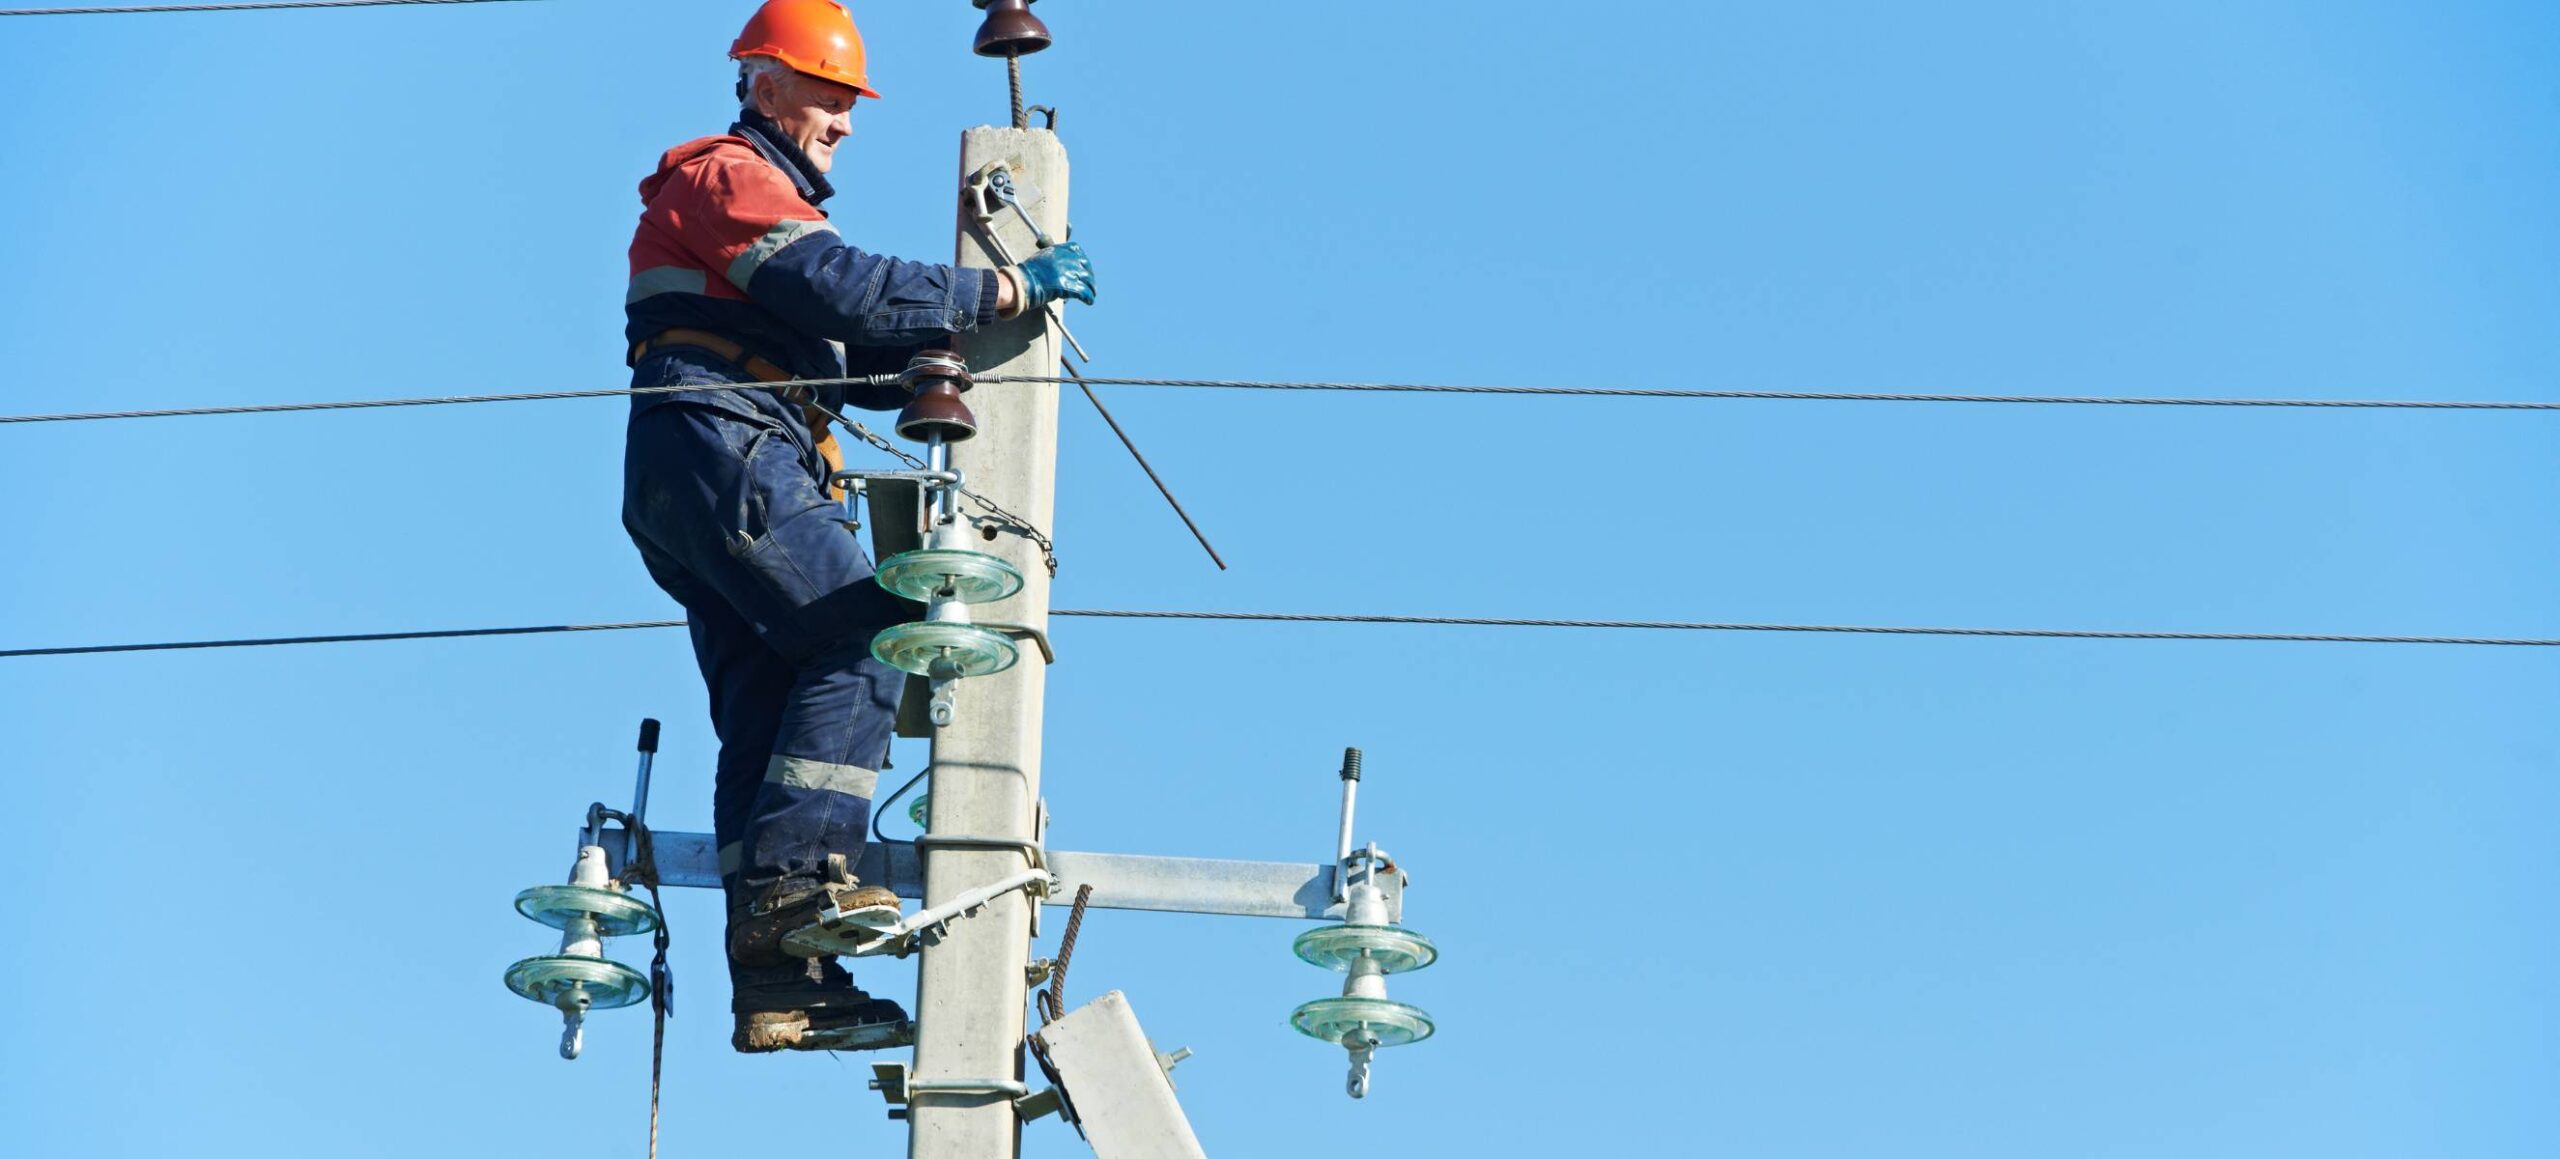 Work safely in the vicinity of live electrical apparatus as a non-electrical worker